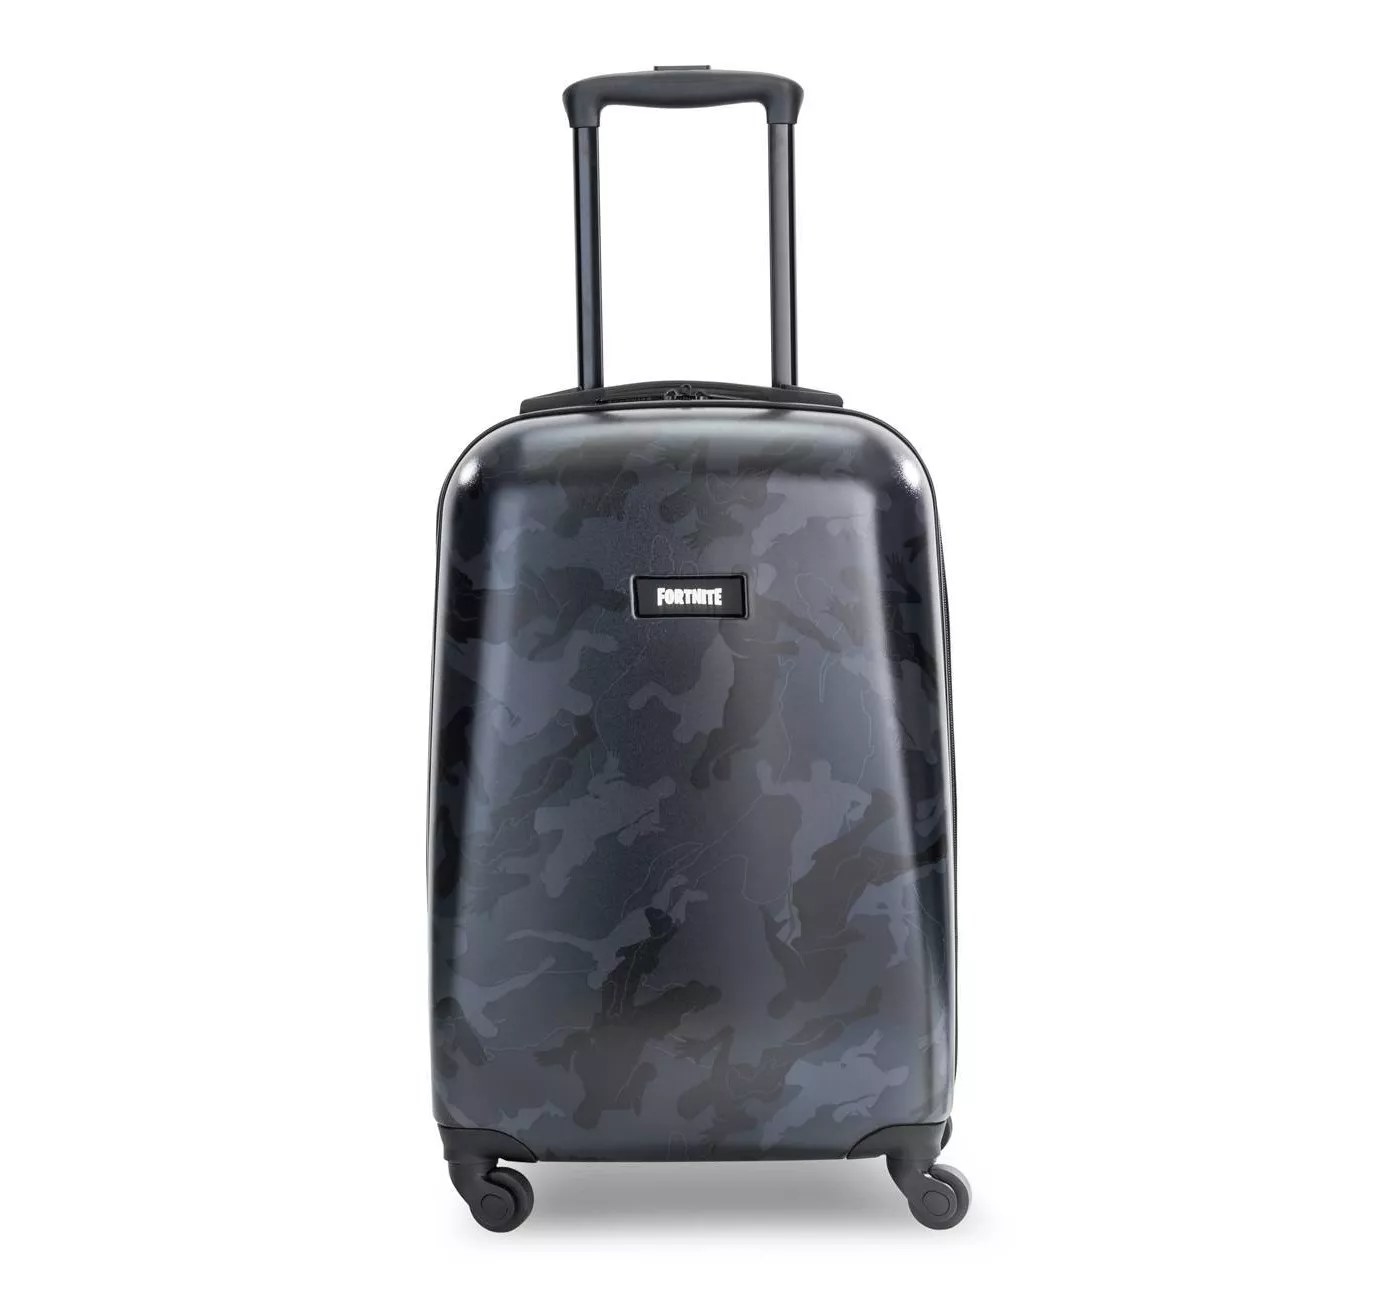 The black and gray camo suitcase